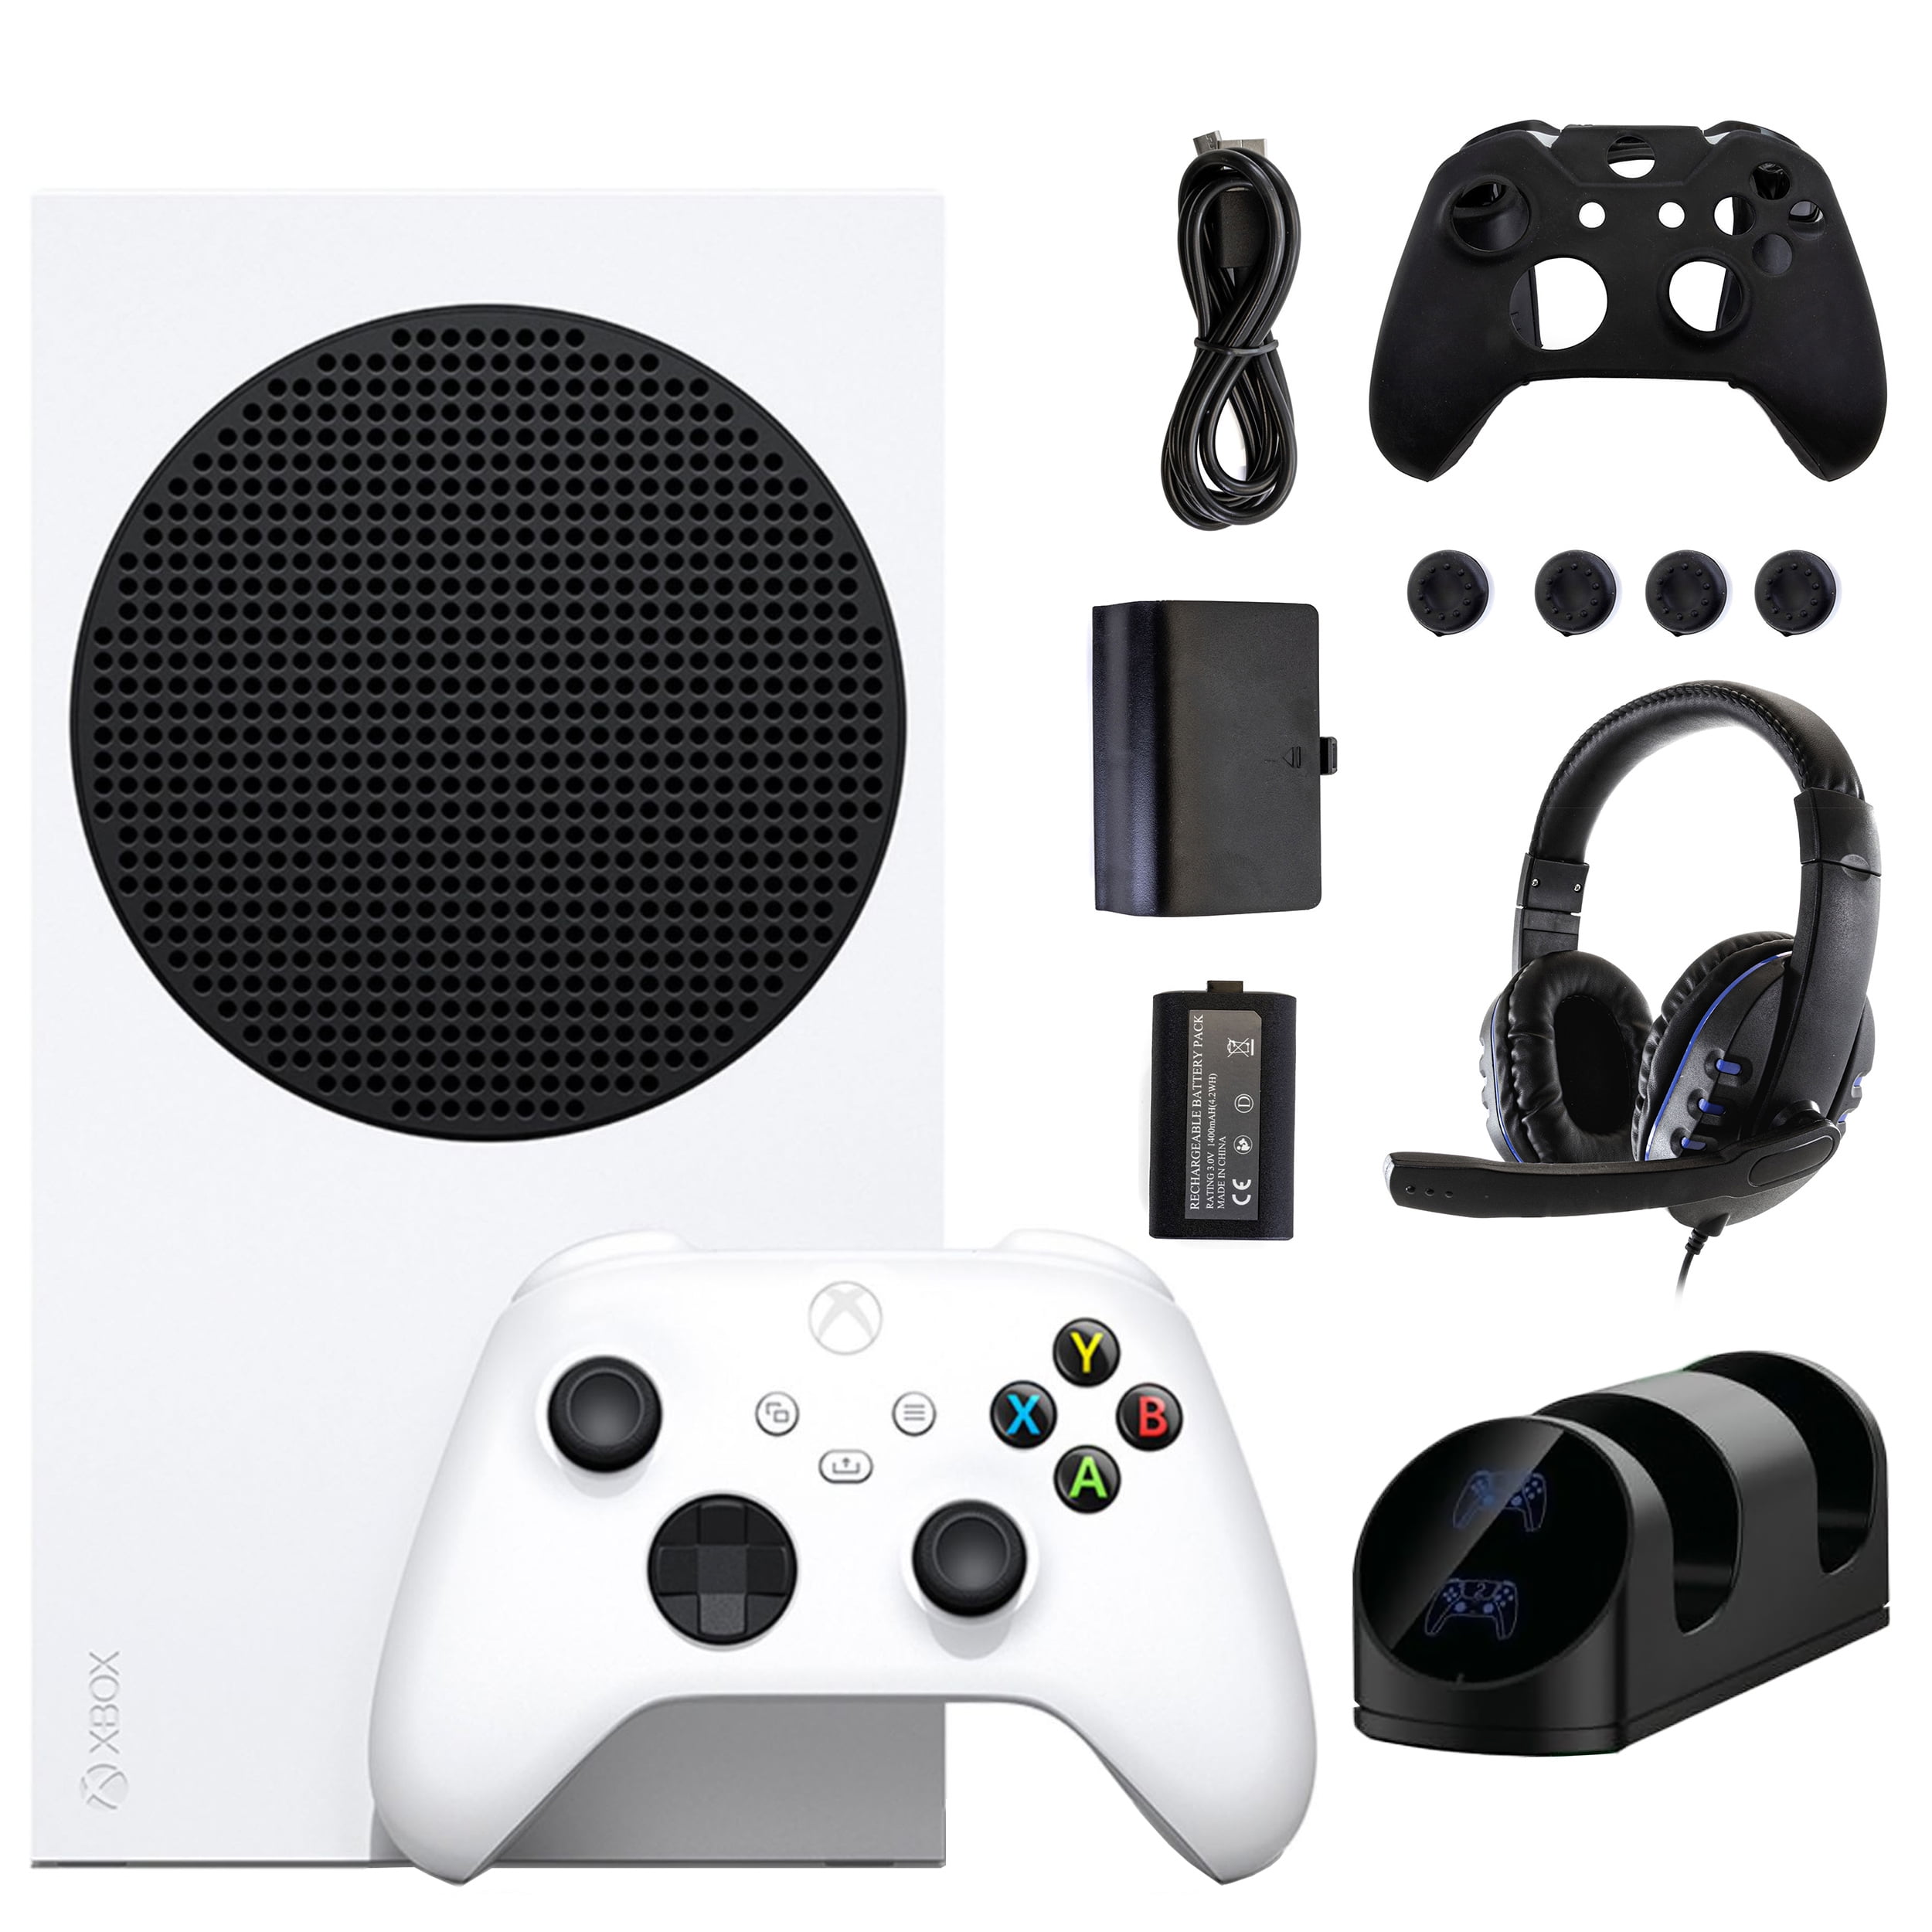 Xbox Series S 512 GB All-Digital Console with Accessories Kit